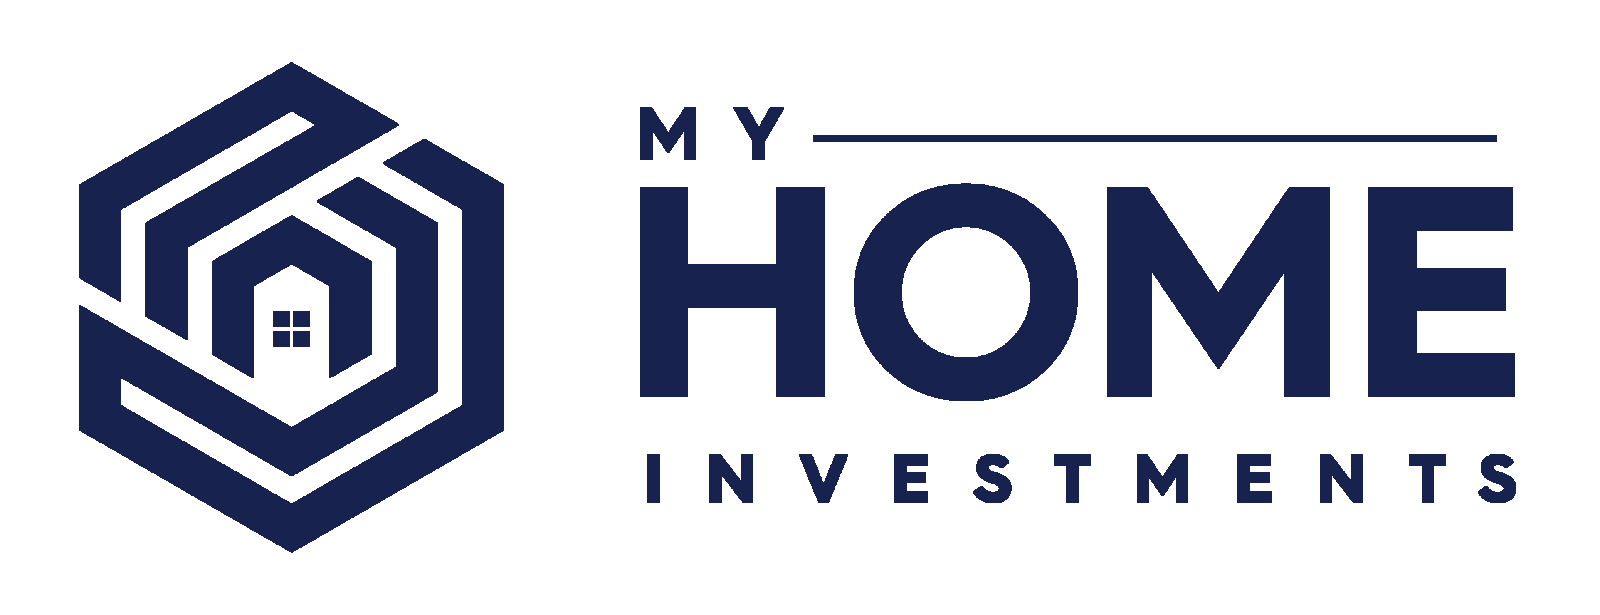 My Home Investments logo